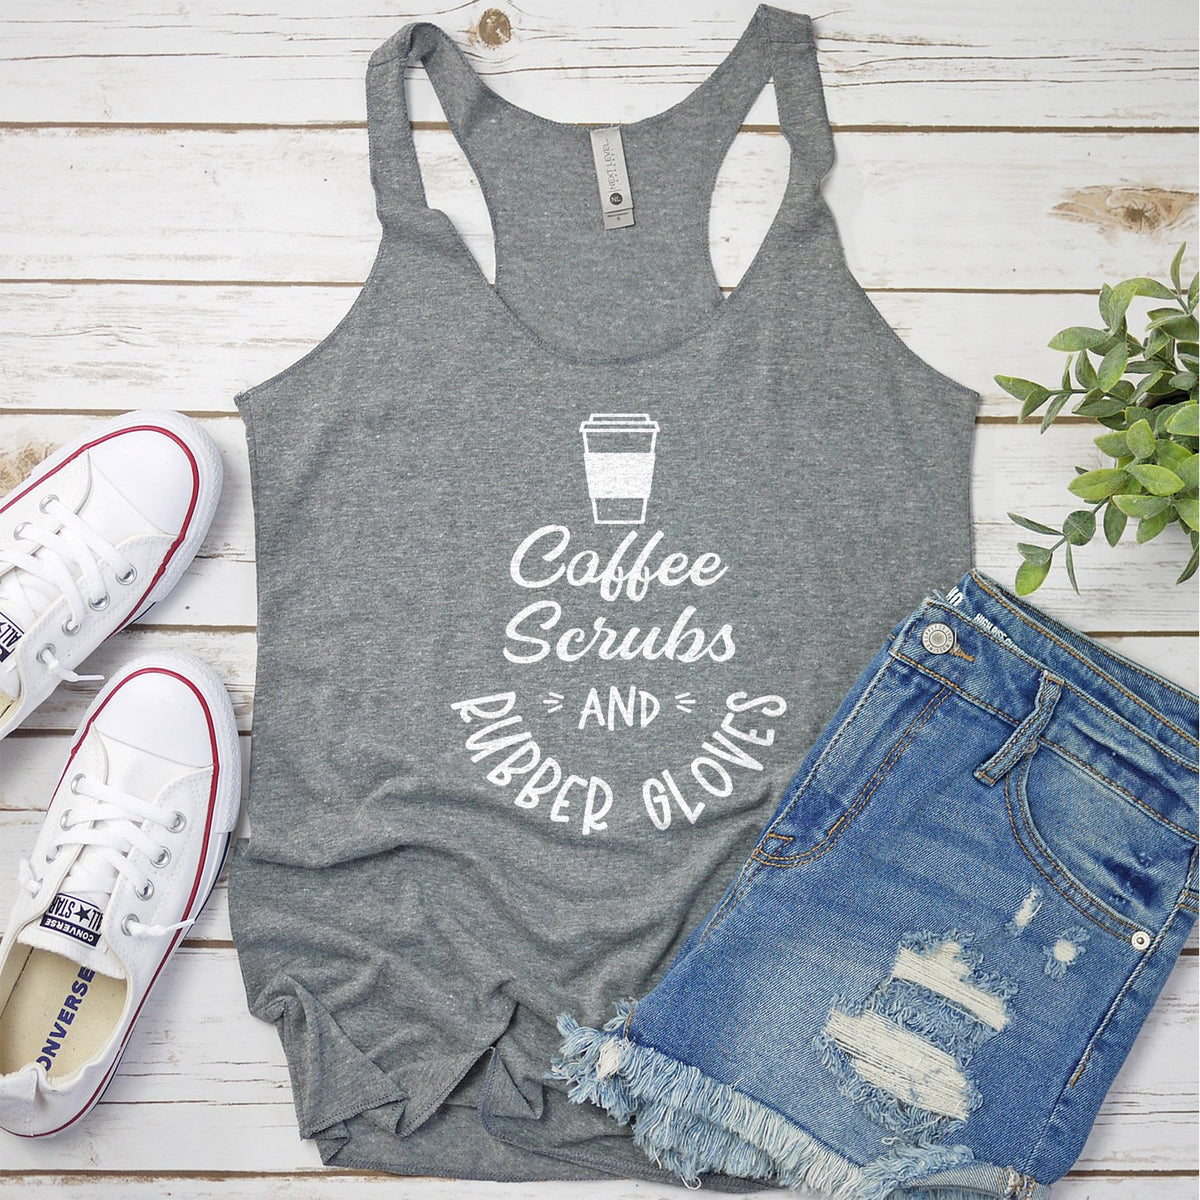 Coffee Scrubs and Rubber Gloves - Tank Top Racerback